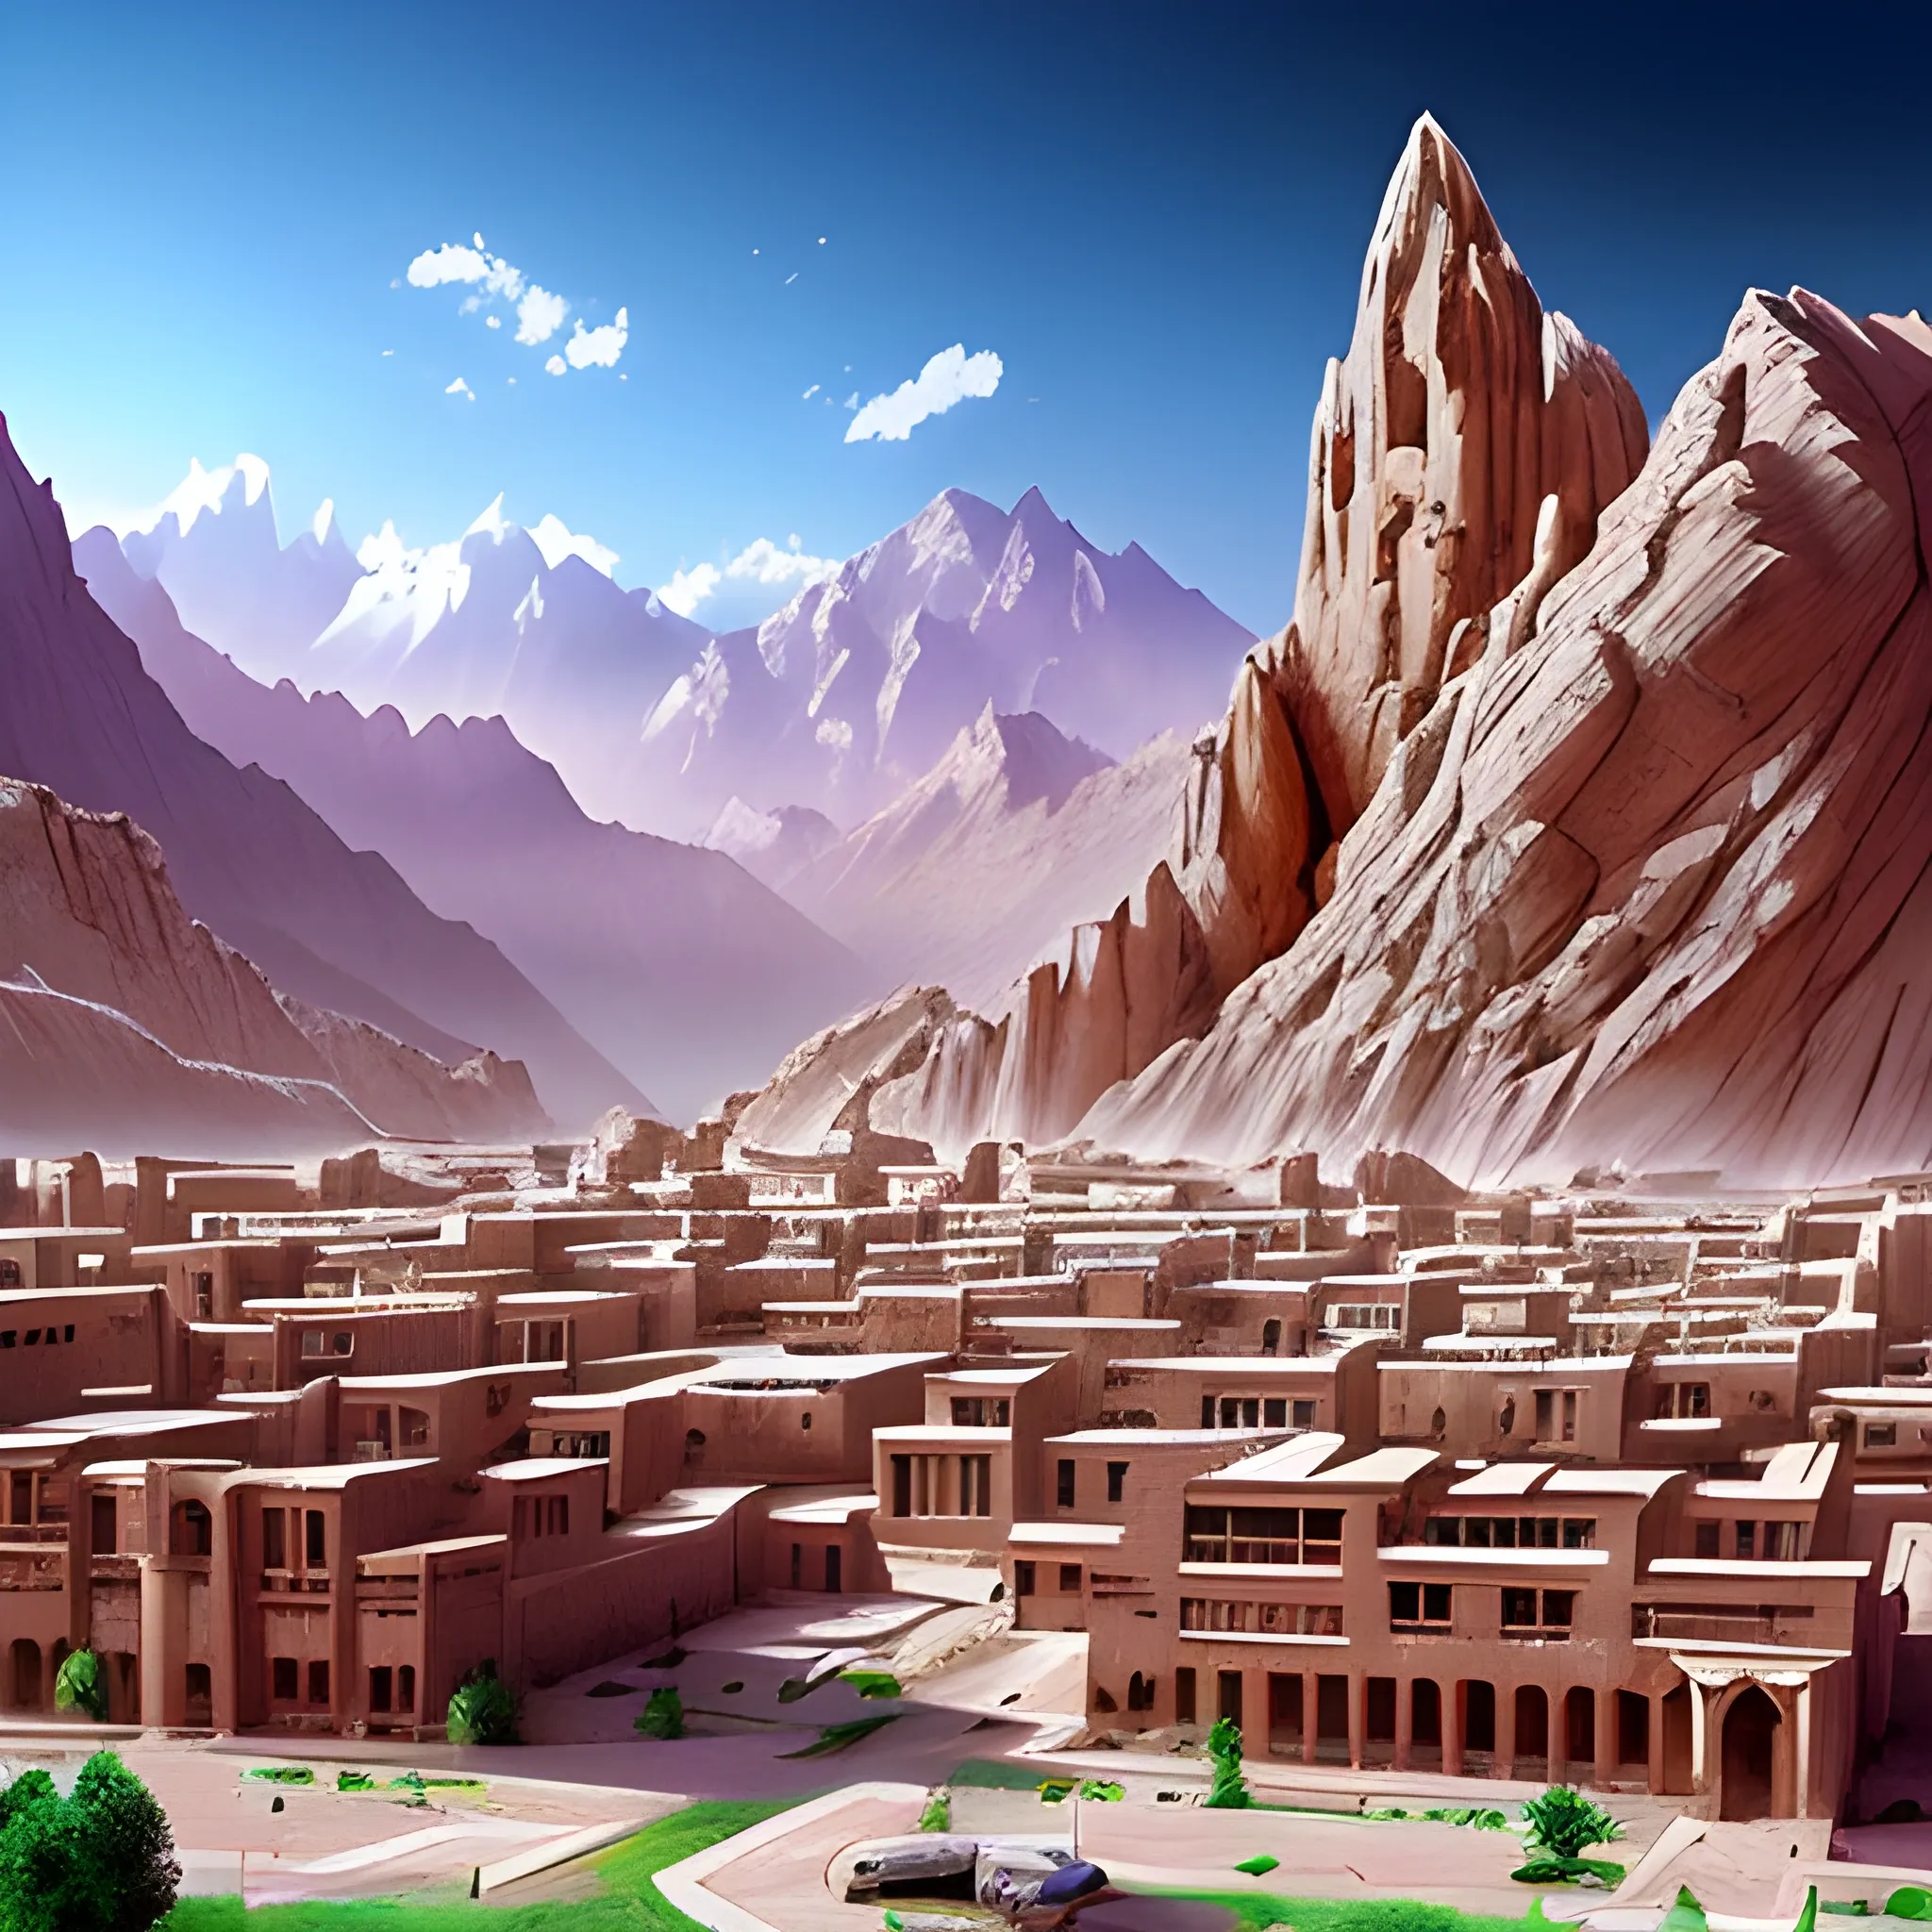 Bamiyan city Afghanistan but futuristic and fantasy 